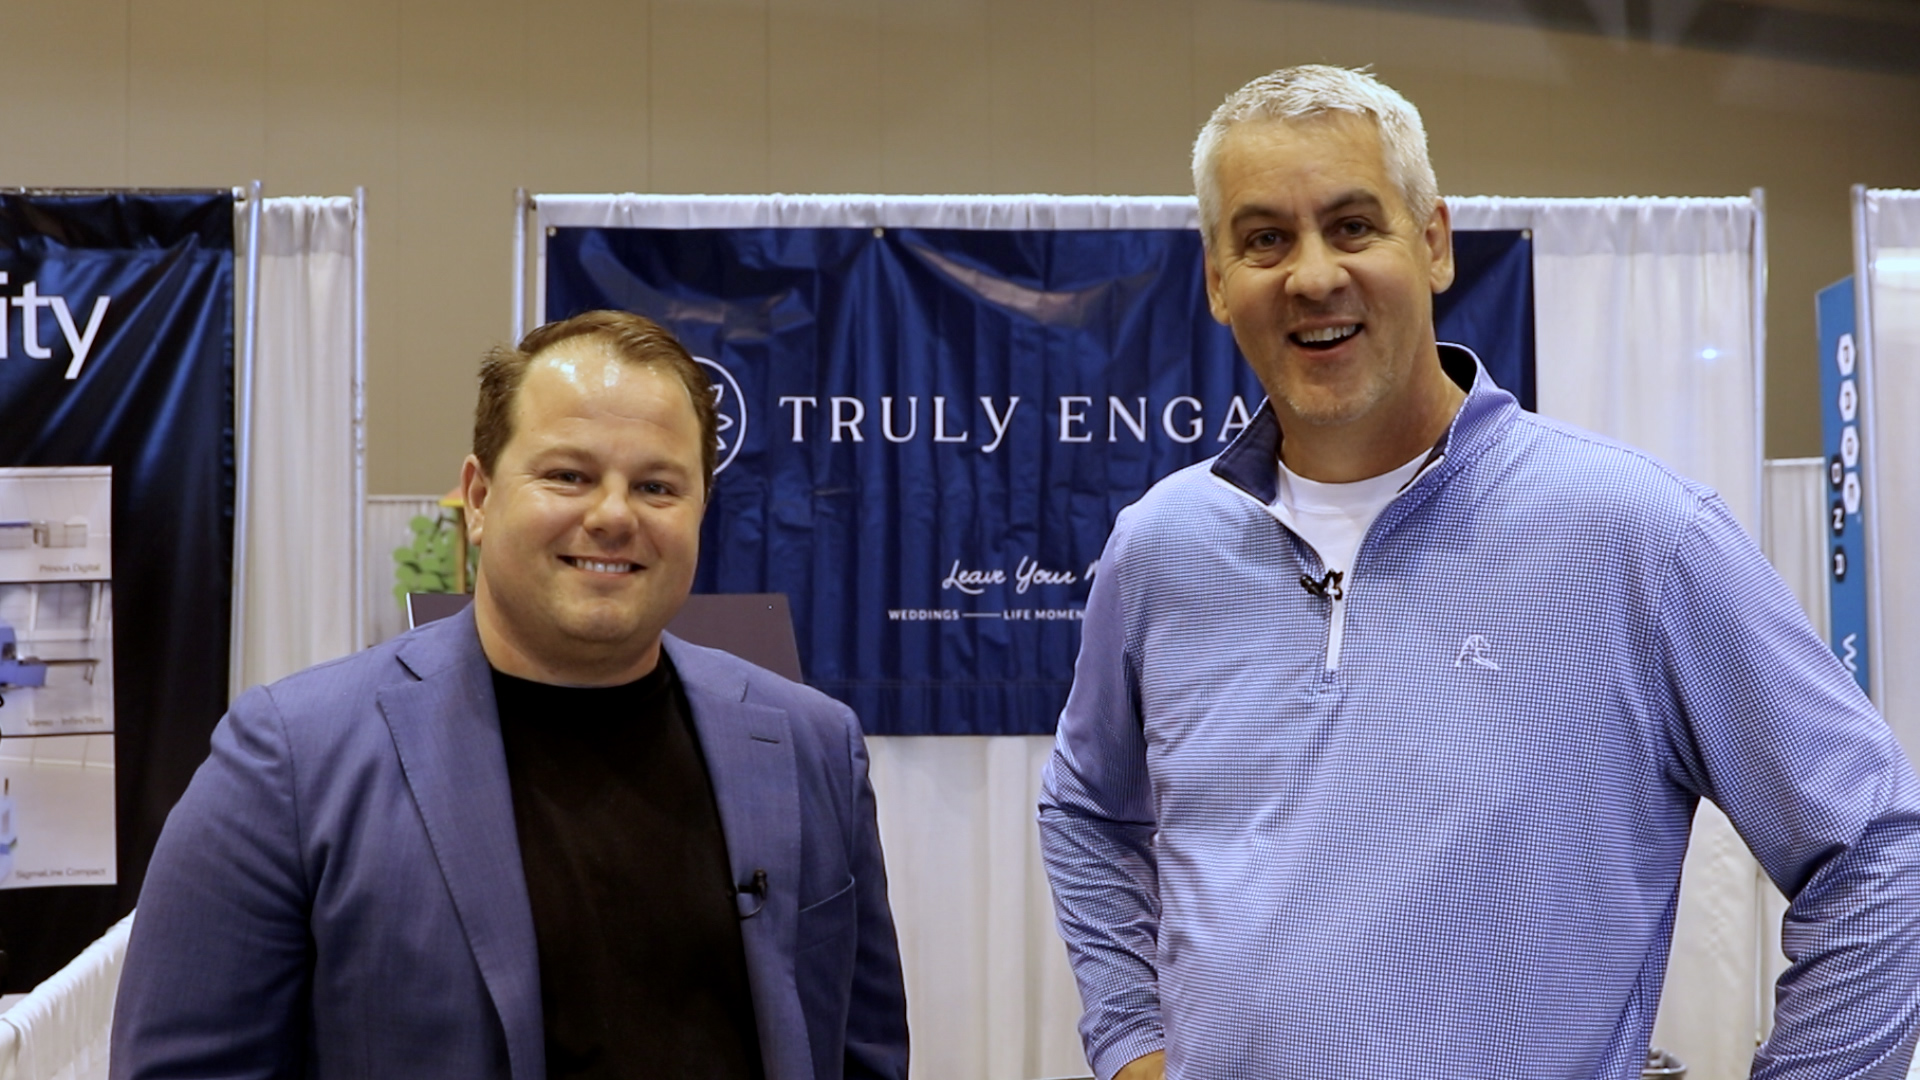 Truly Engaging’s David Baird on Specialty Printing with Embellishments